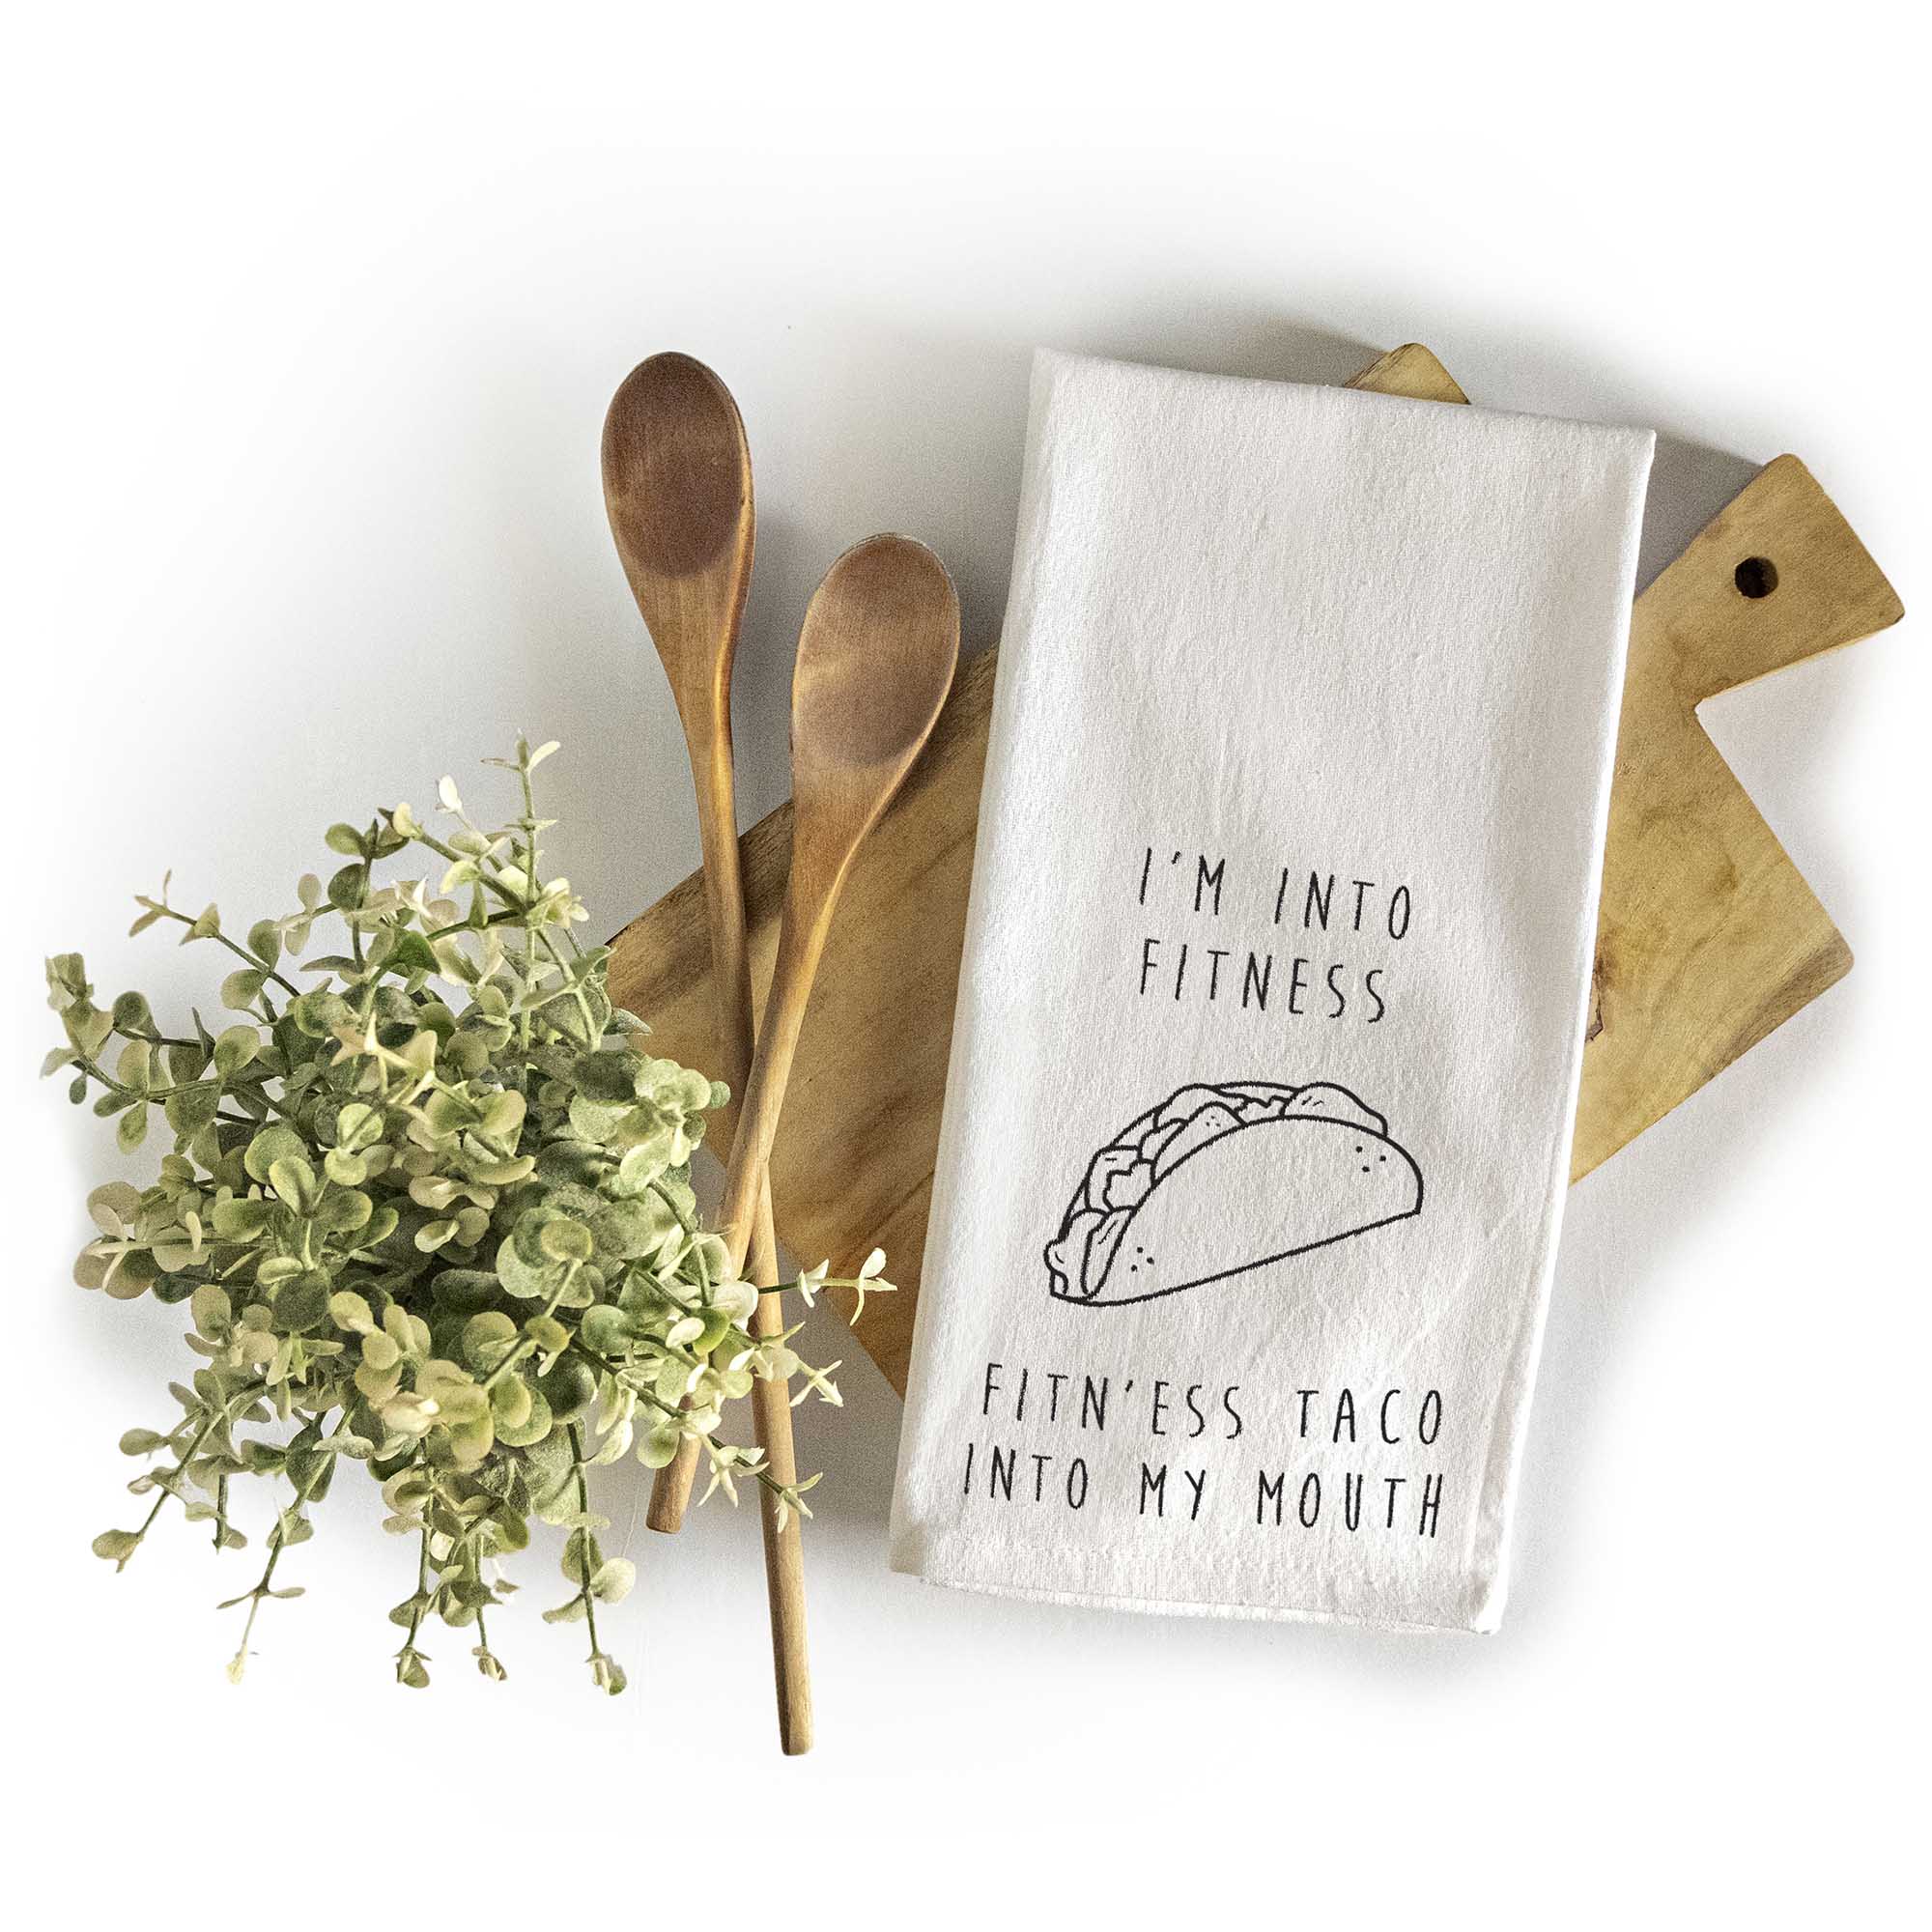 I'm Into Fitness Taco Kitchen Towel 18x24 Inch, Funny Saying Kitchen T